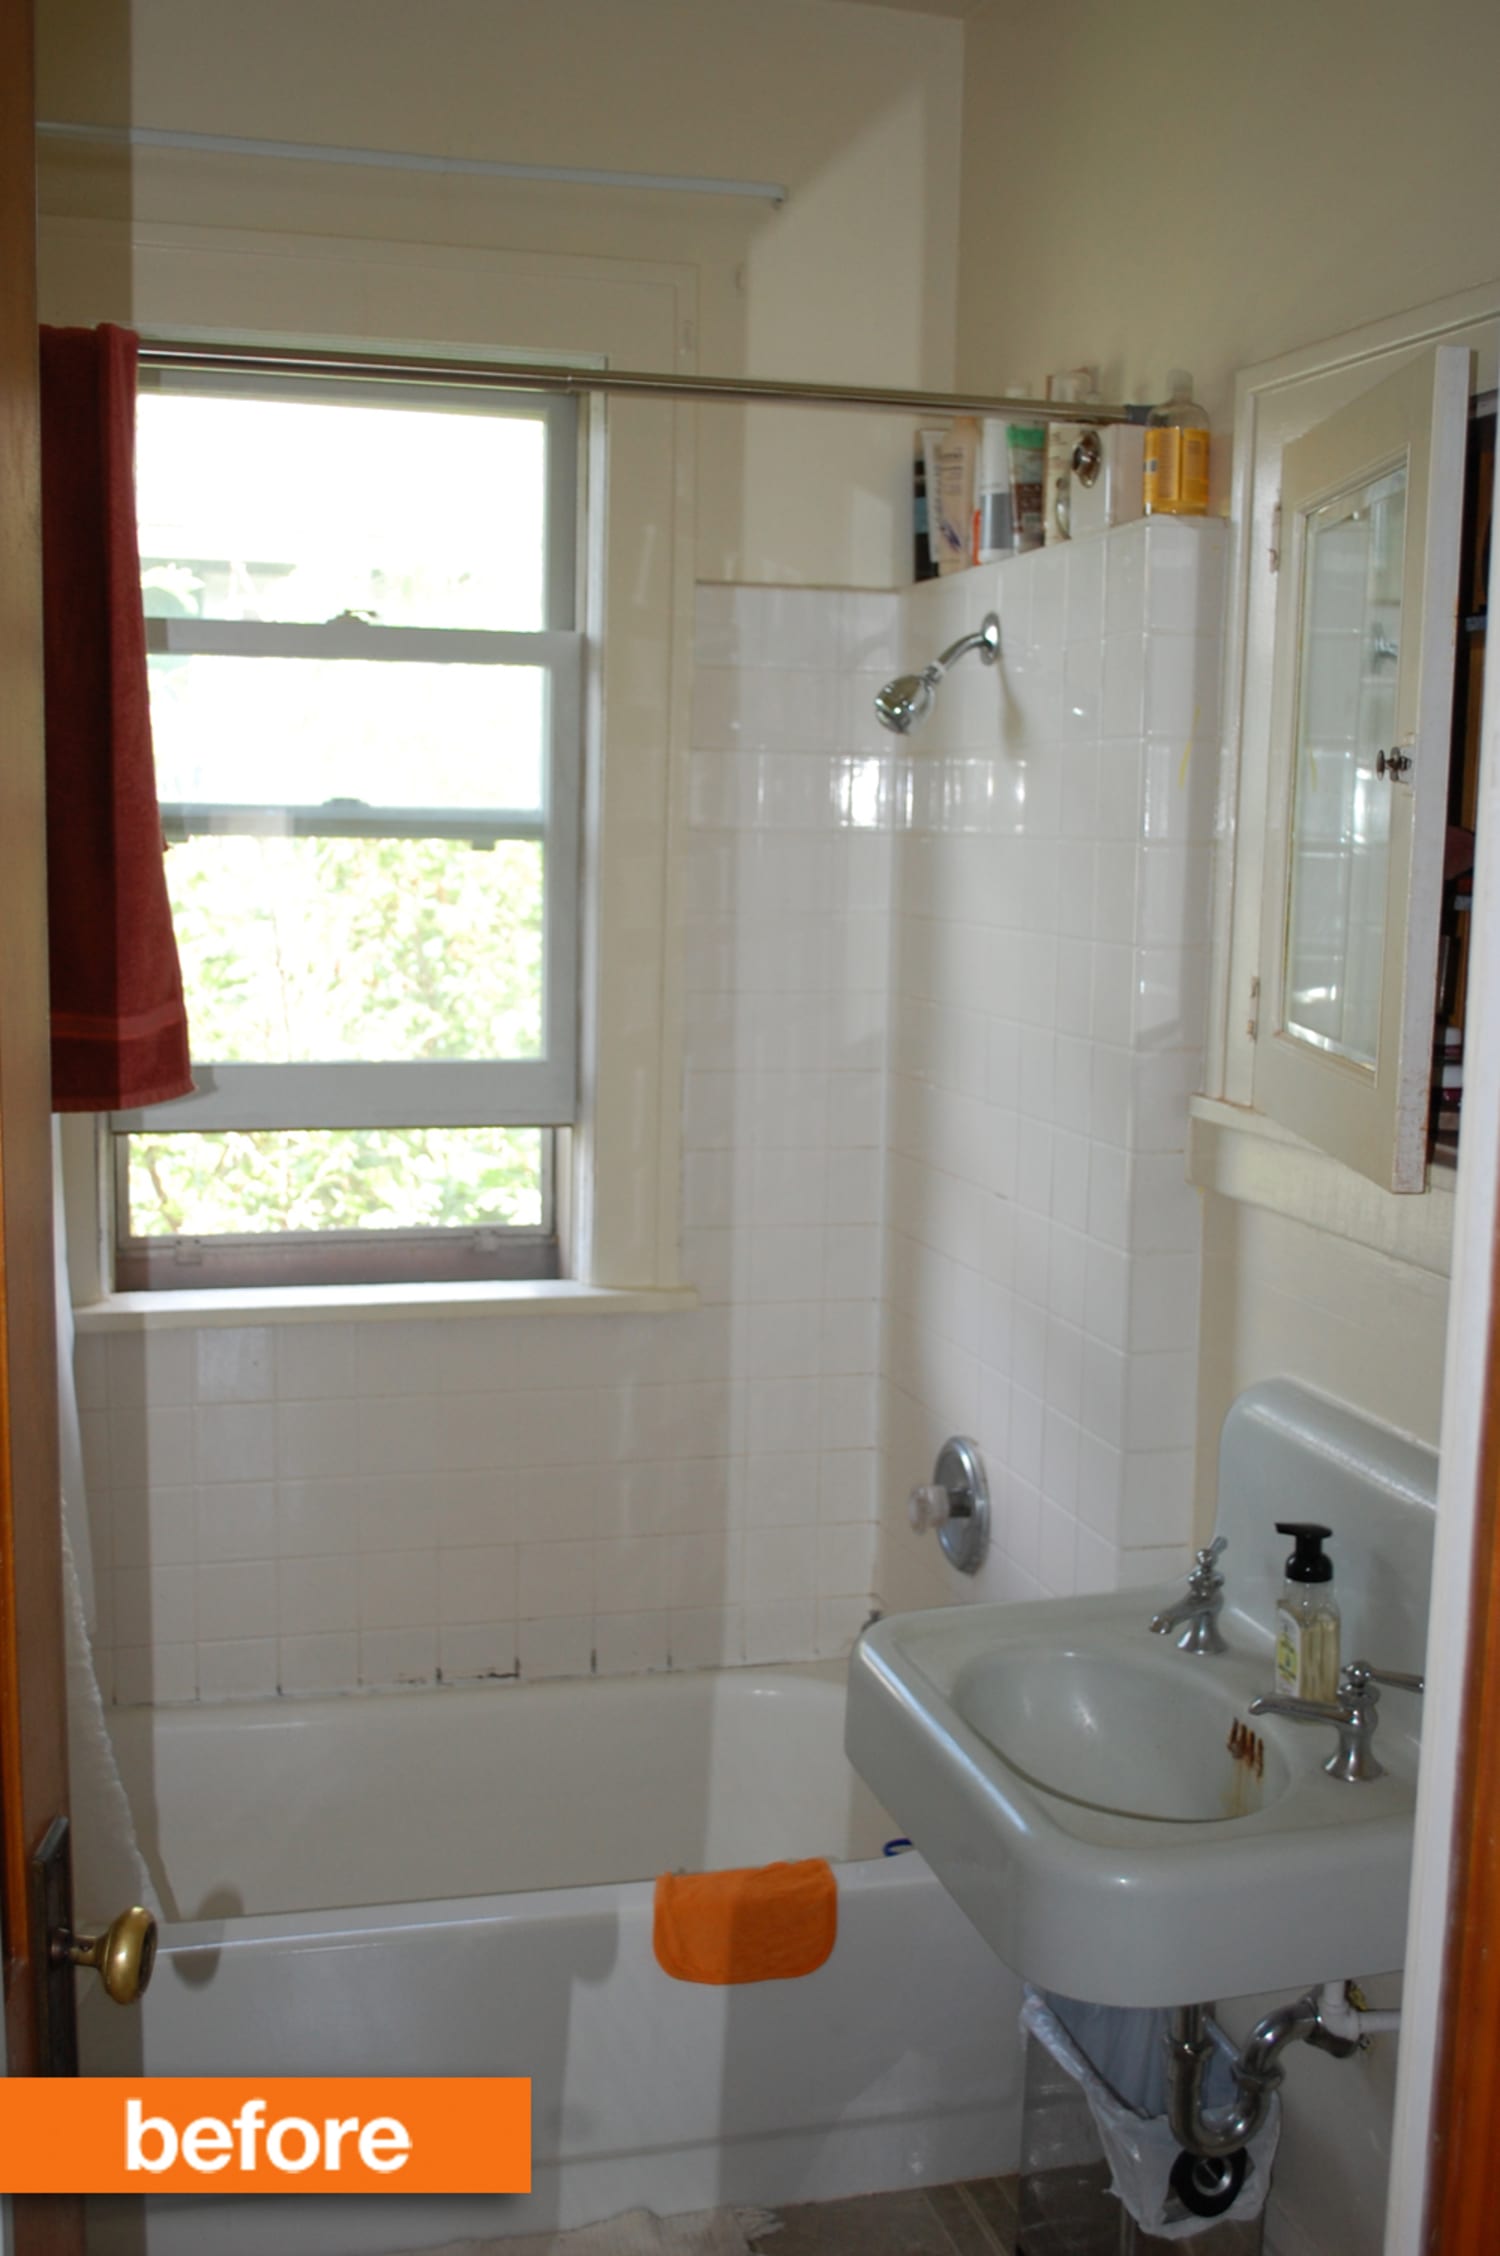 Before & After: A Stylish Bathroom Transformation